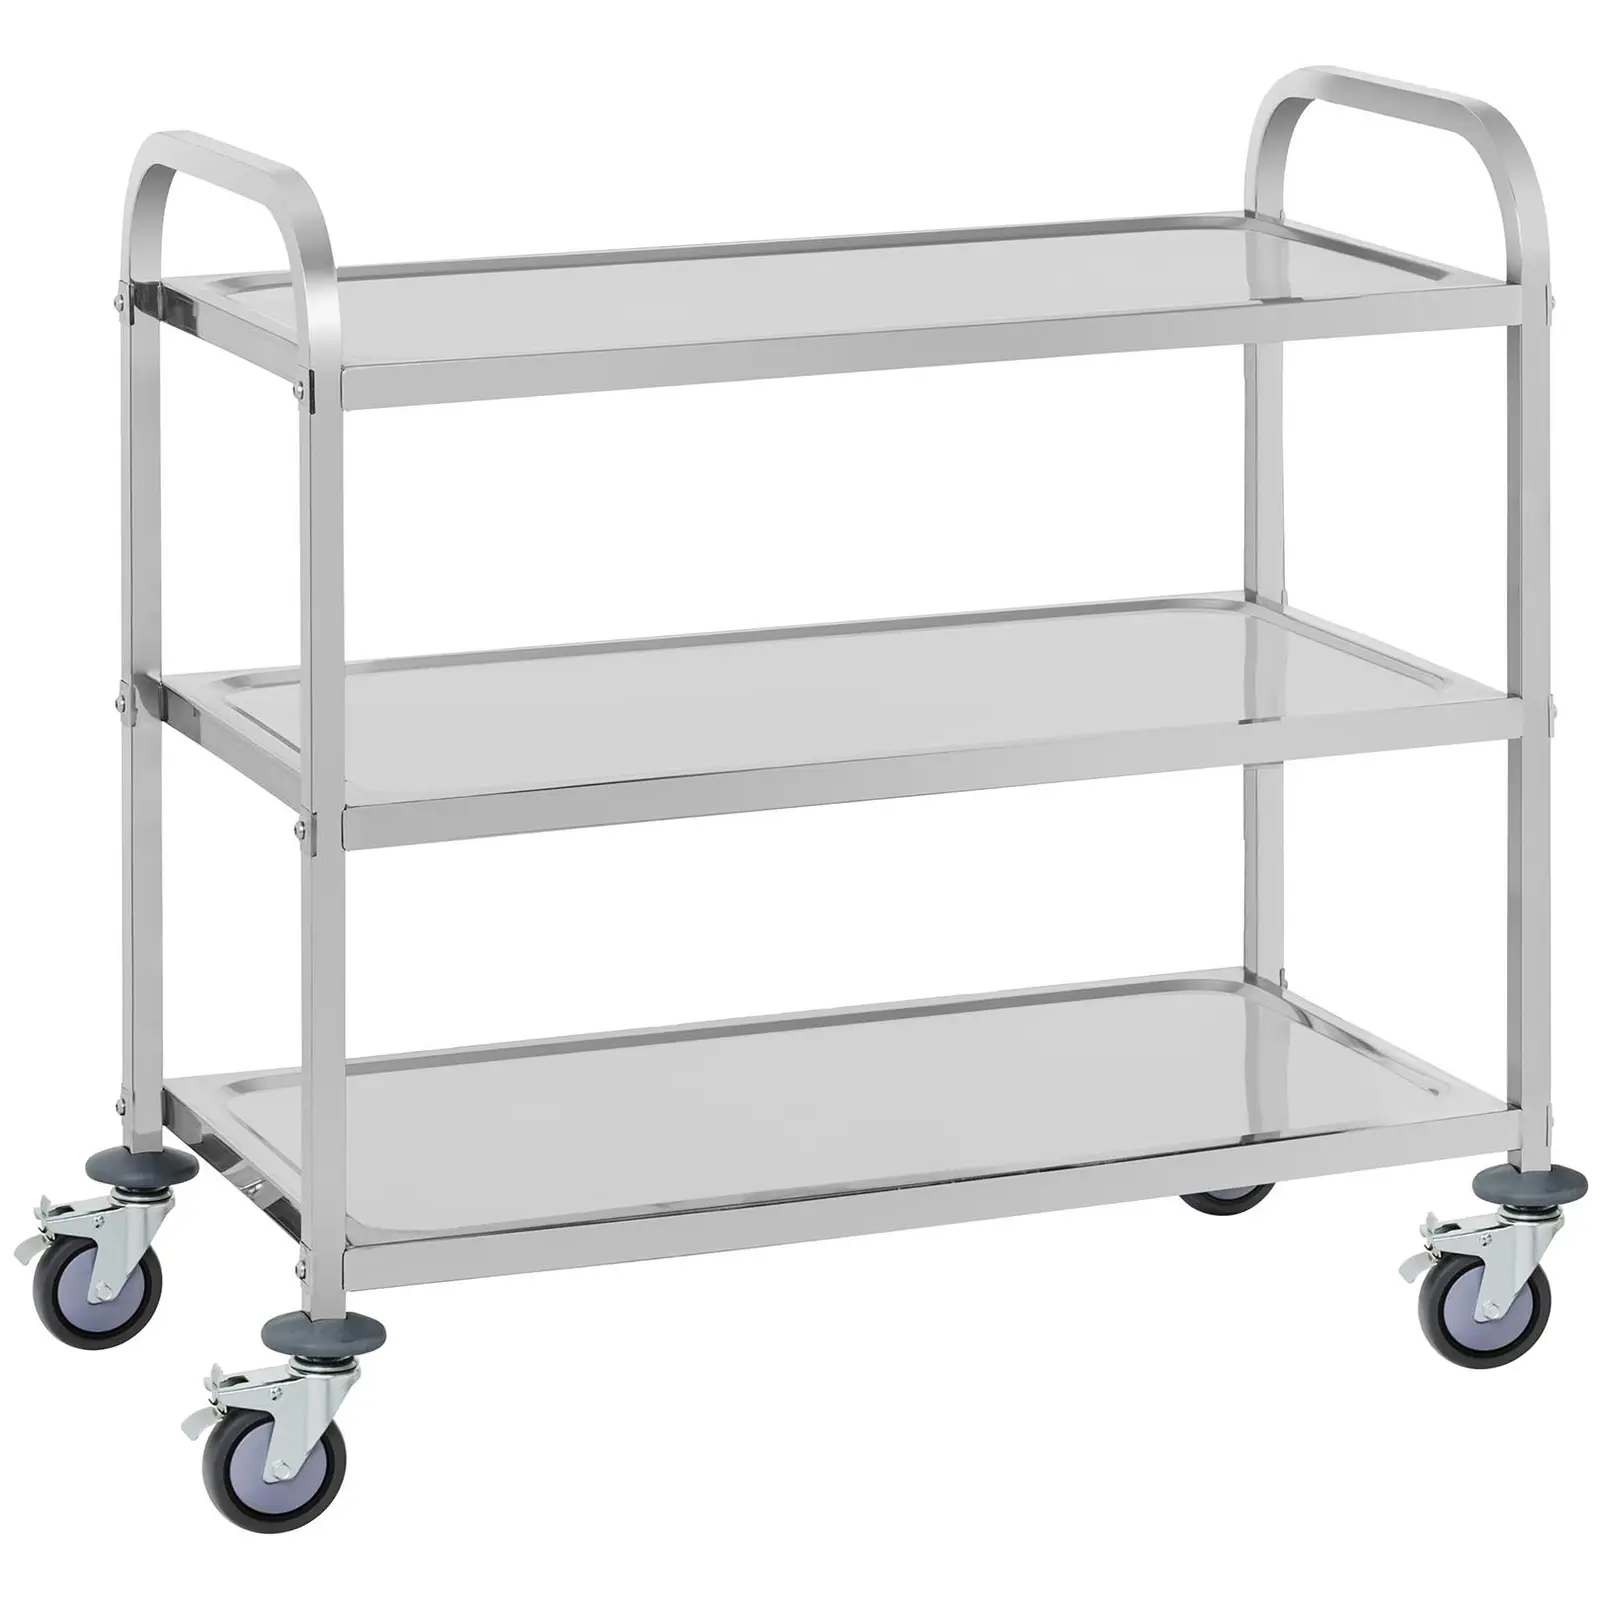 Stainless Steel Serving Trolley - 3 Shelves - Up To 500 kg